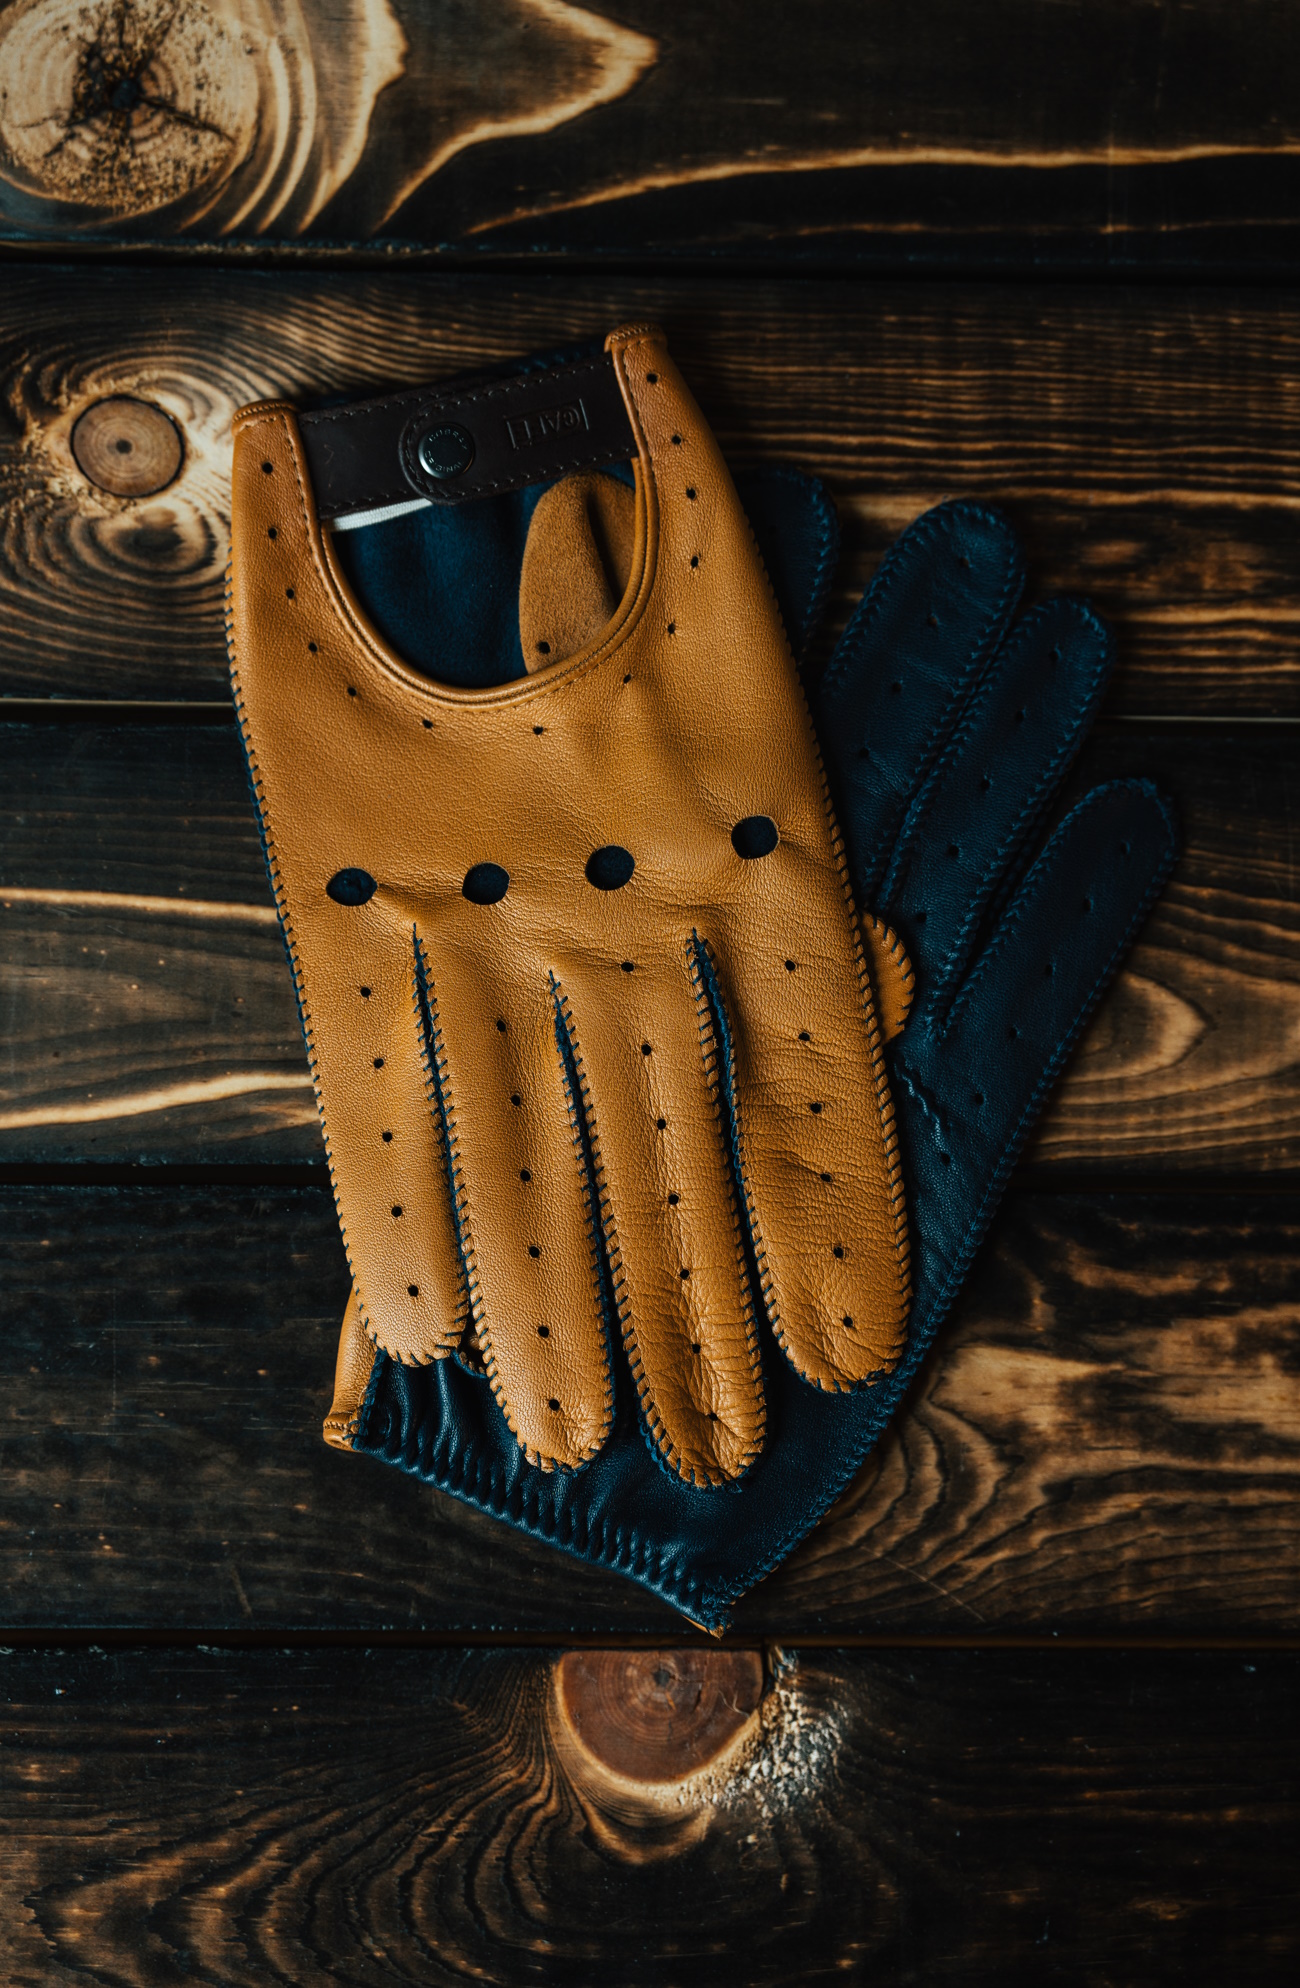 The Triton Driving Gloves in Roasted & Marlin